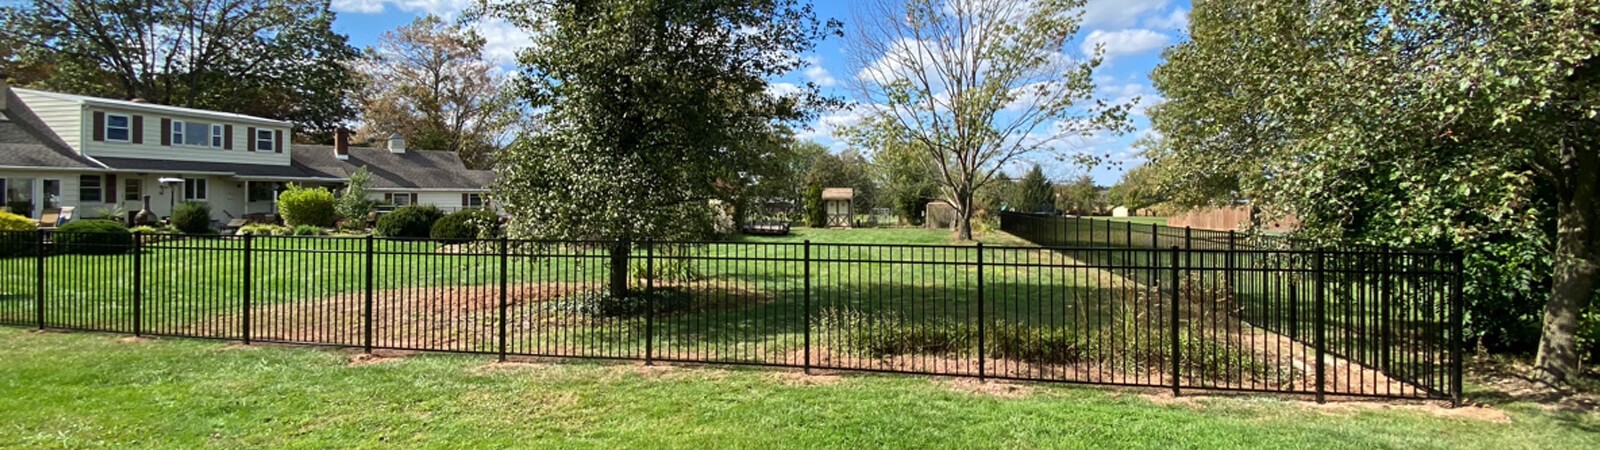 Montco Fence, a aluminum fence company and installation services